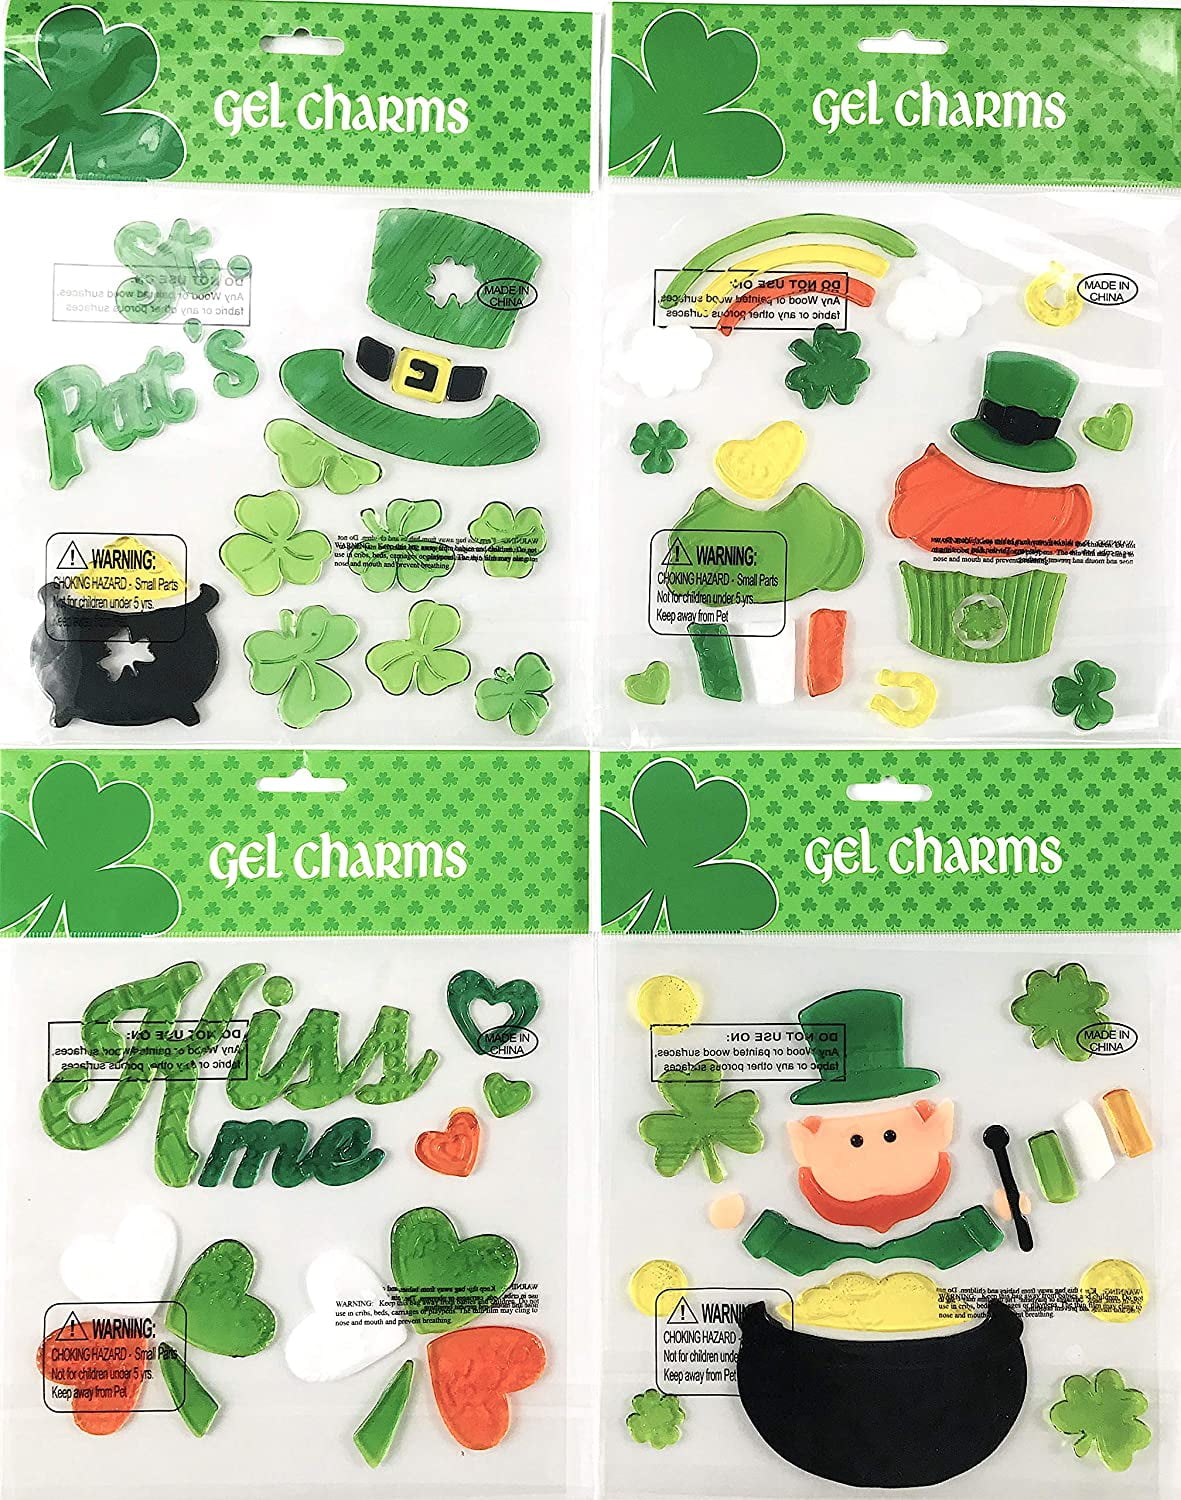 4 Sheet Set Three-Leaf Clovers Golden Horseshoes and Coins Owl Window Gel Clings with Shamrocks St Patricks Day Decorations and More 